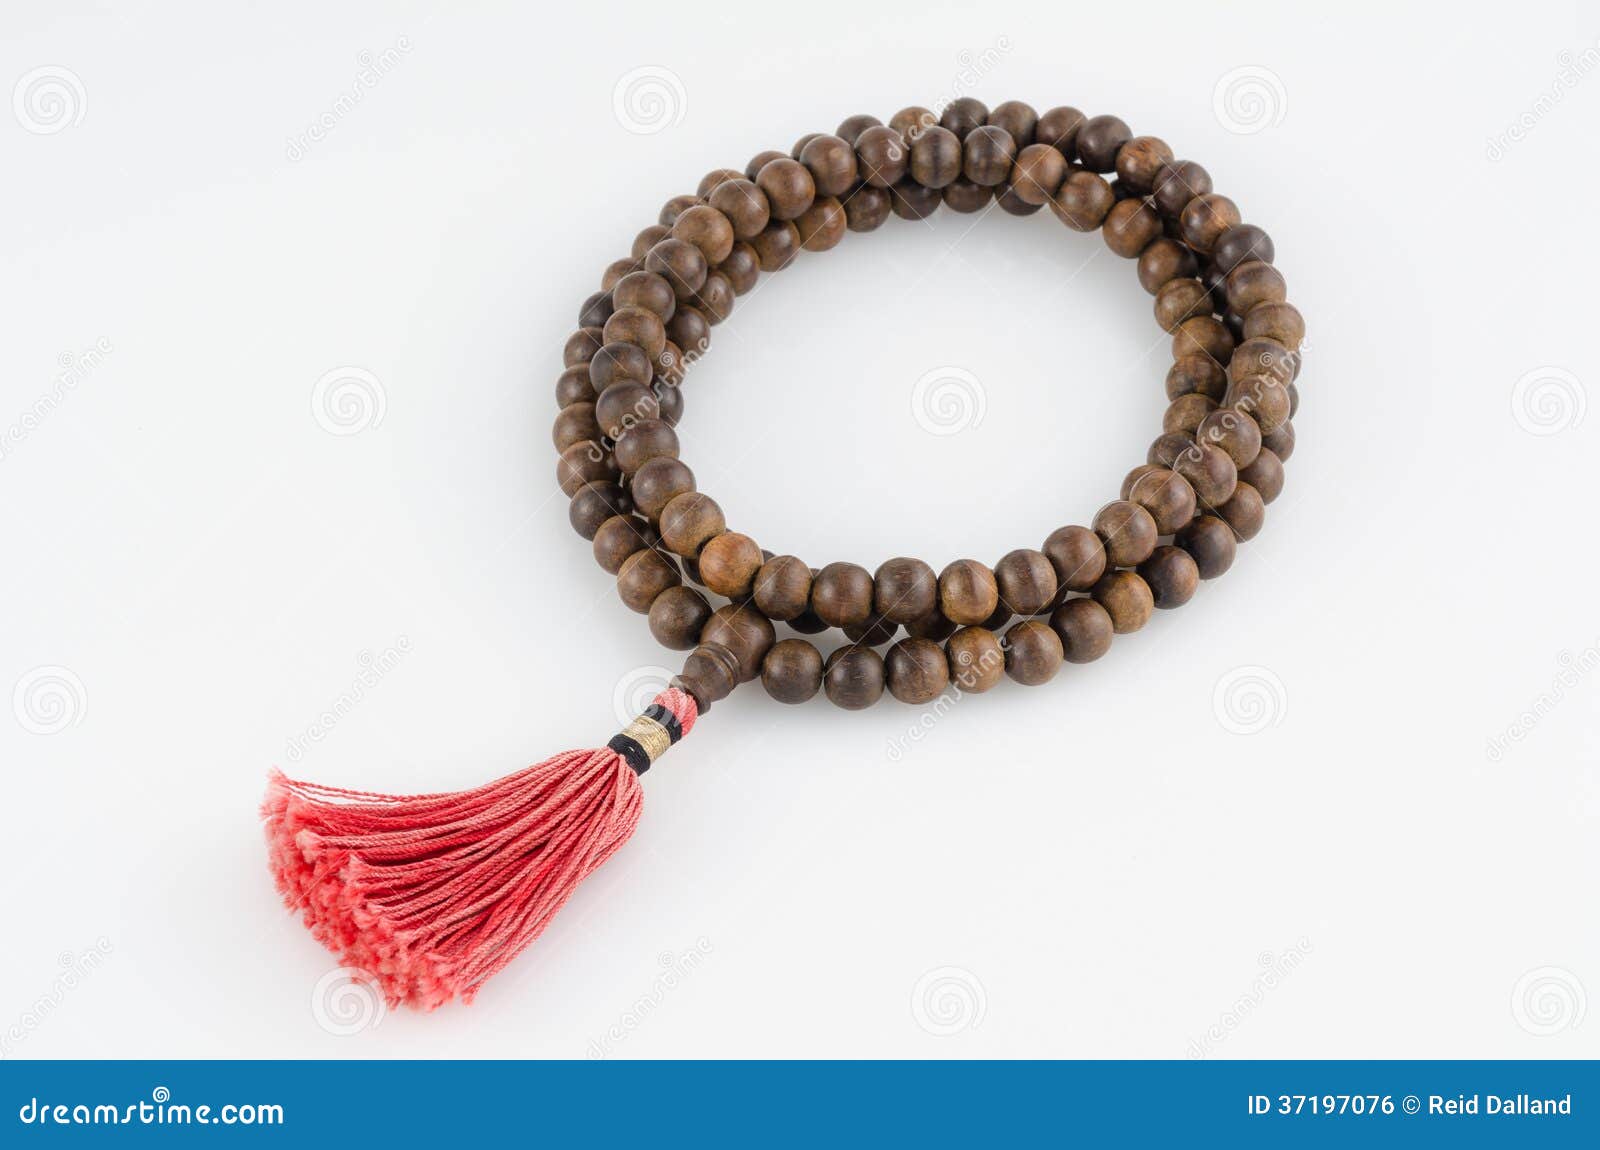 Hindu prayer beads isolated on a white background  CanStock